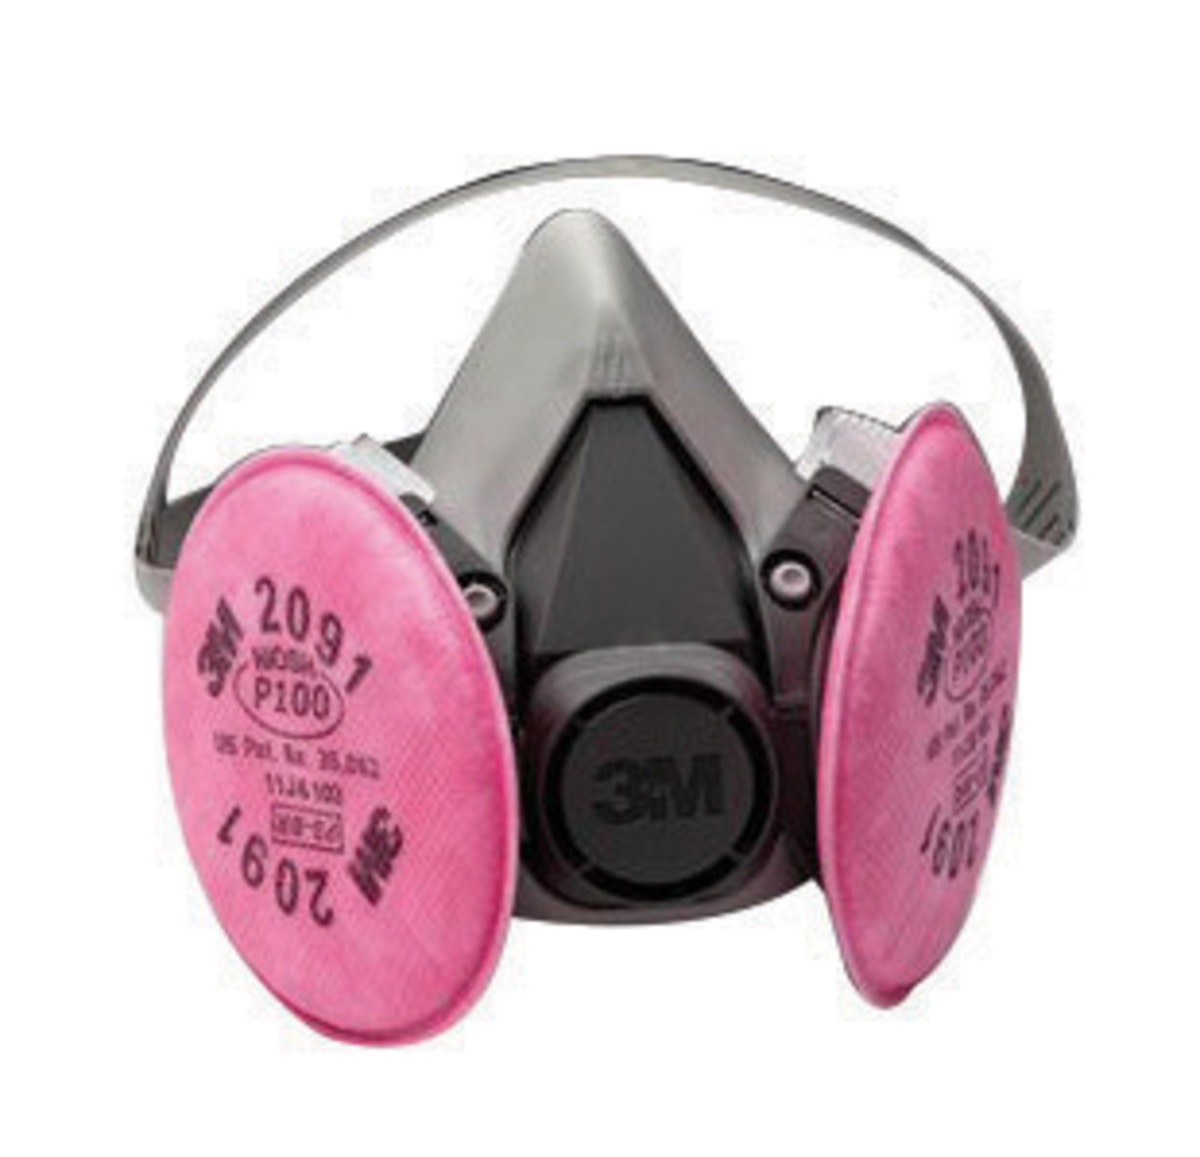 3M™ Medium 6000 Series Half Face Air Purifying Respirator (Availability restrictions apply.)